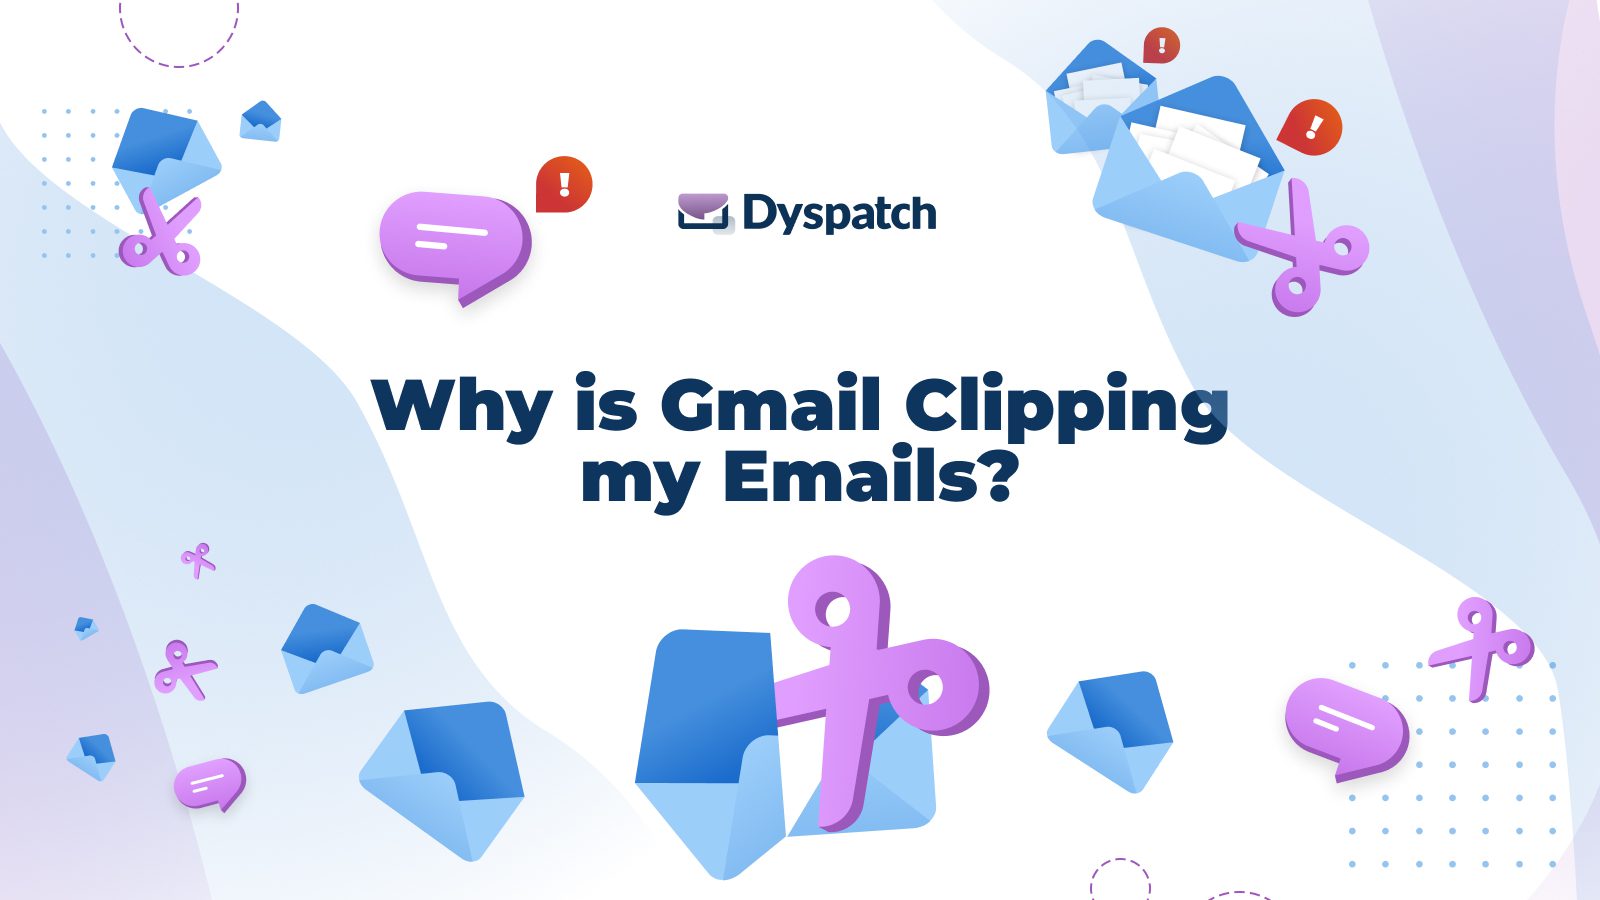 Prevent gmail clipping errors with Dyspatch